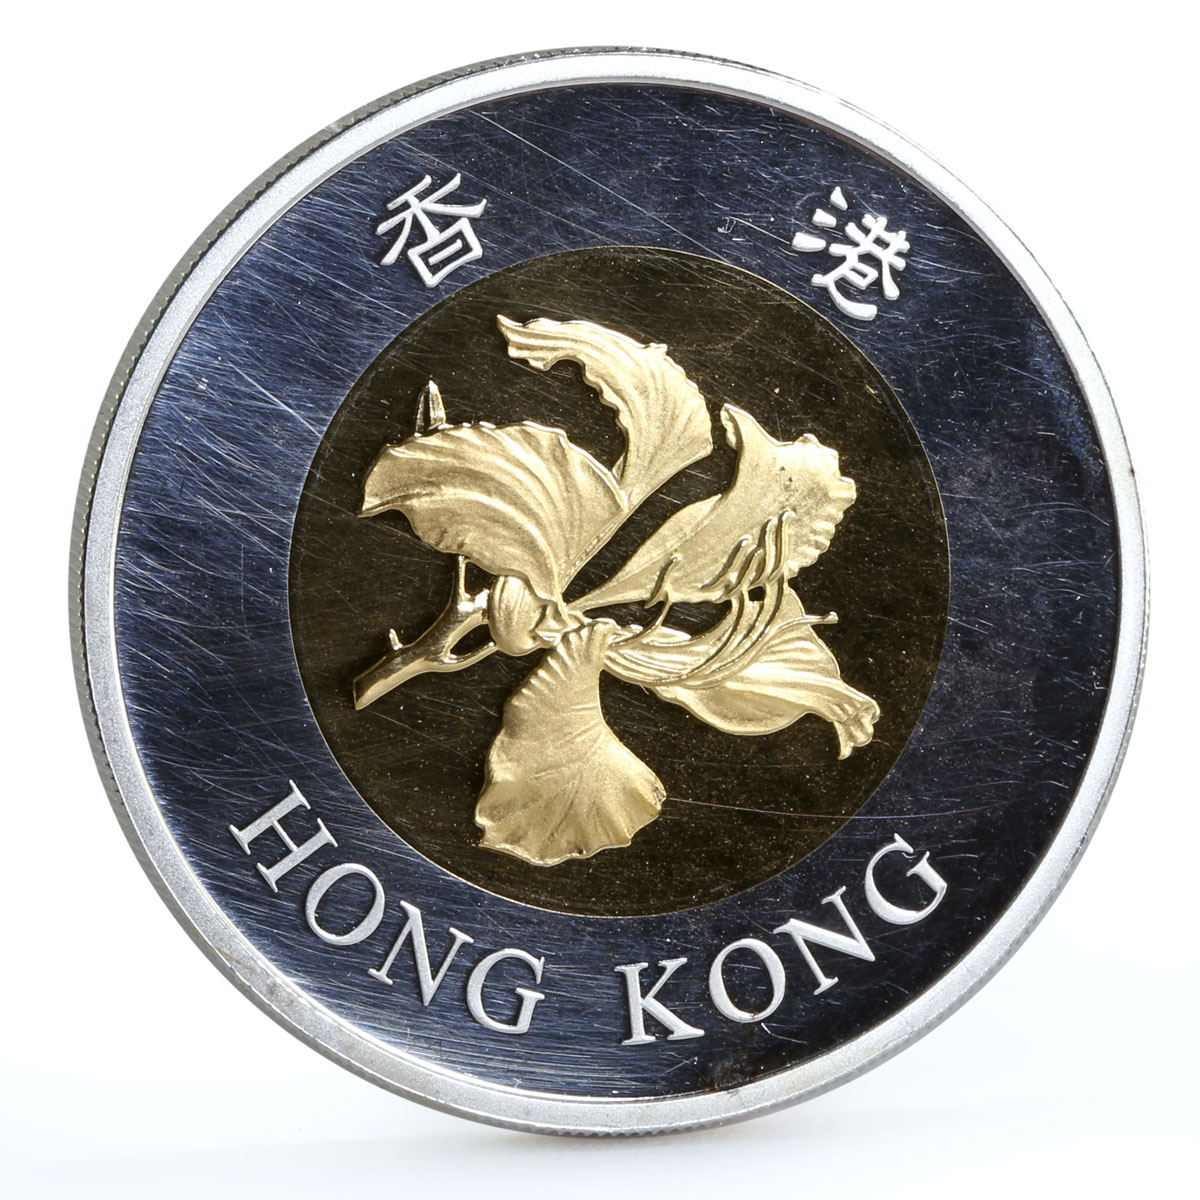 Hong Kong 50 dollars Good Luck Make Your Wish True gilded silver coin 2002